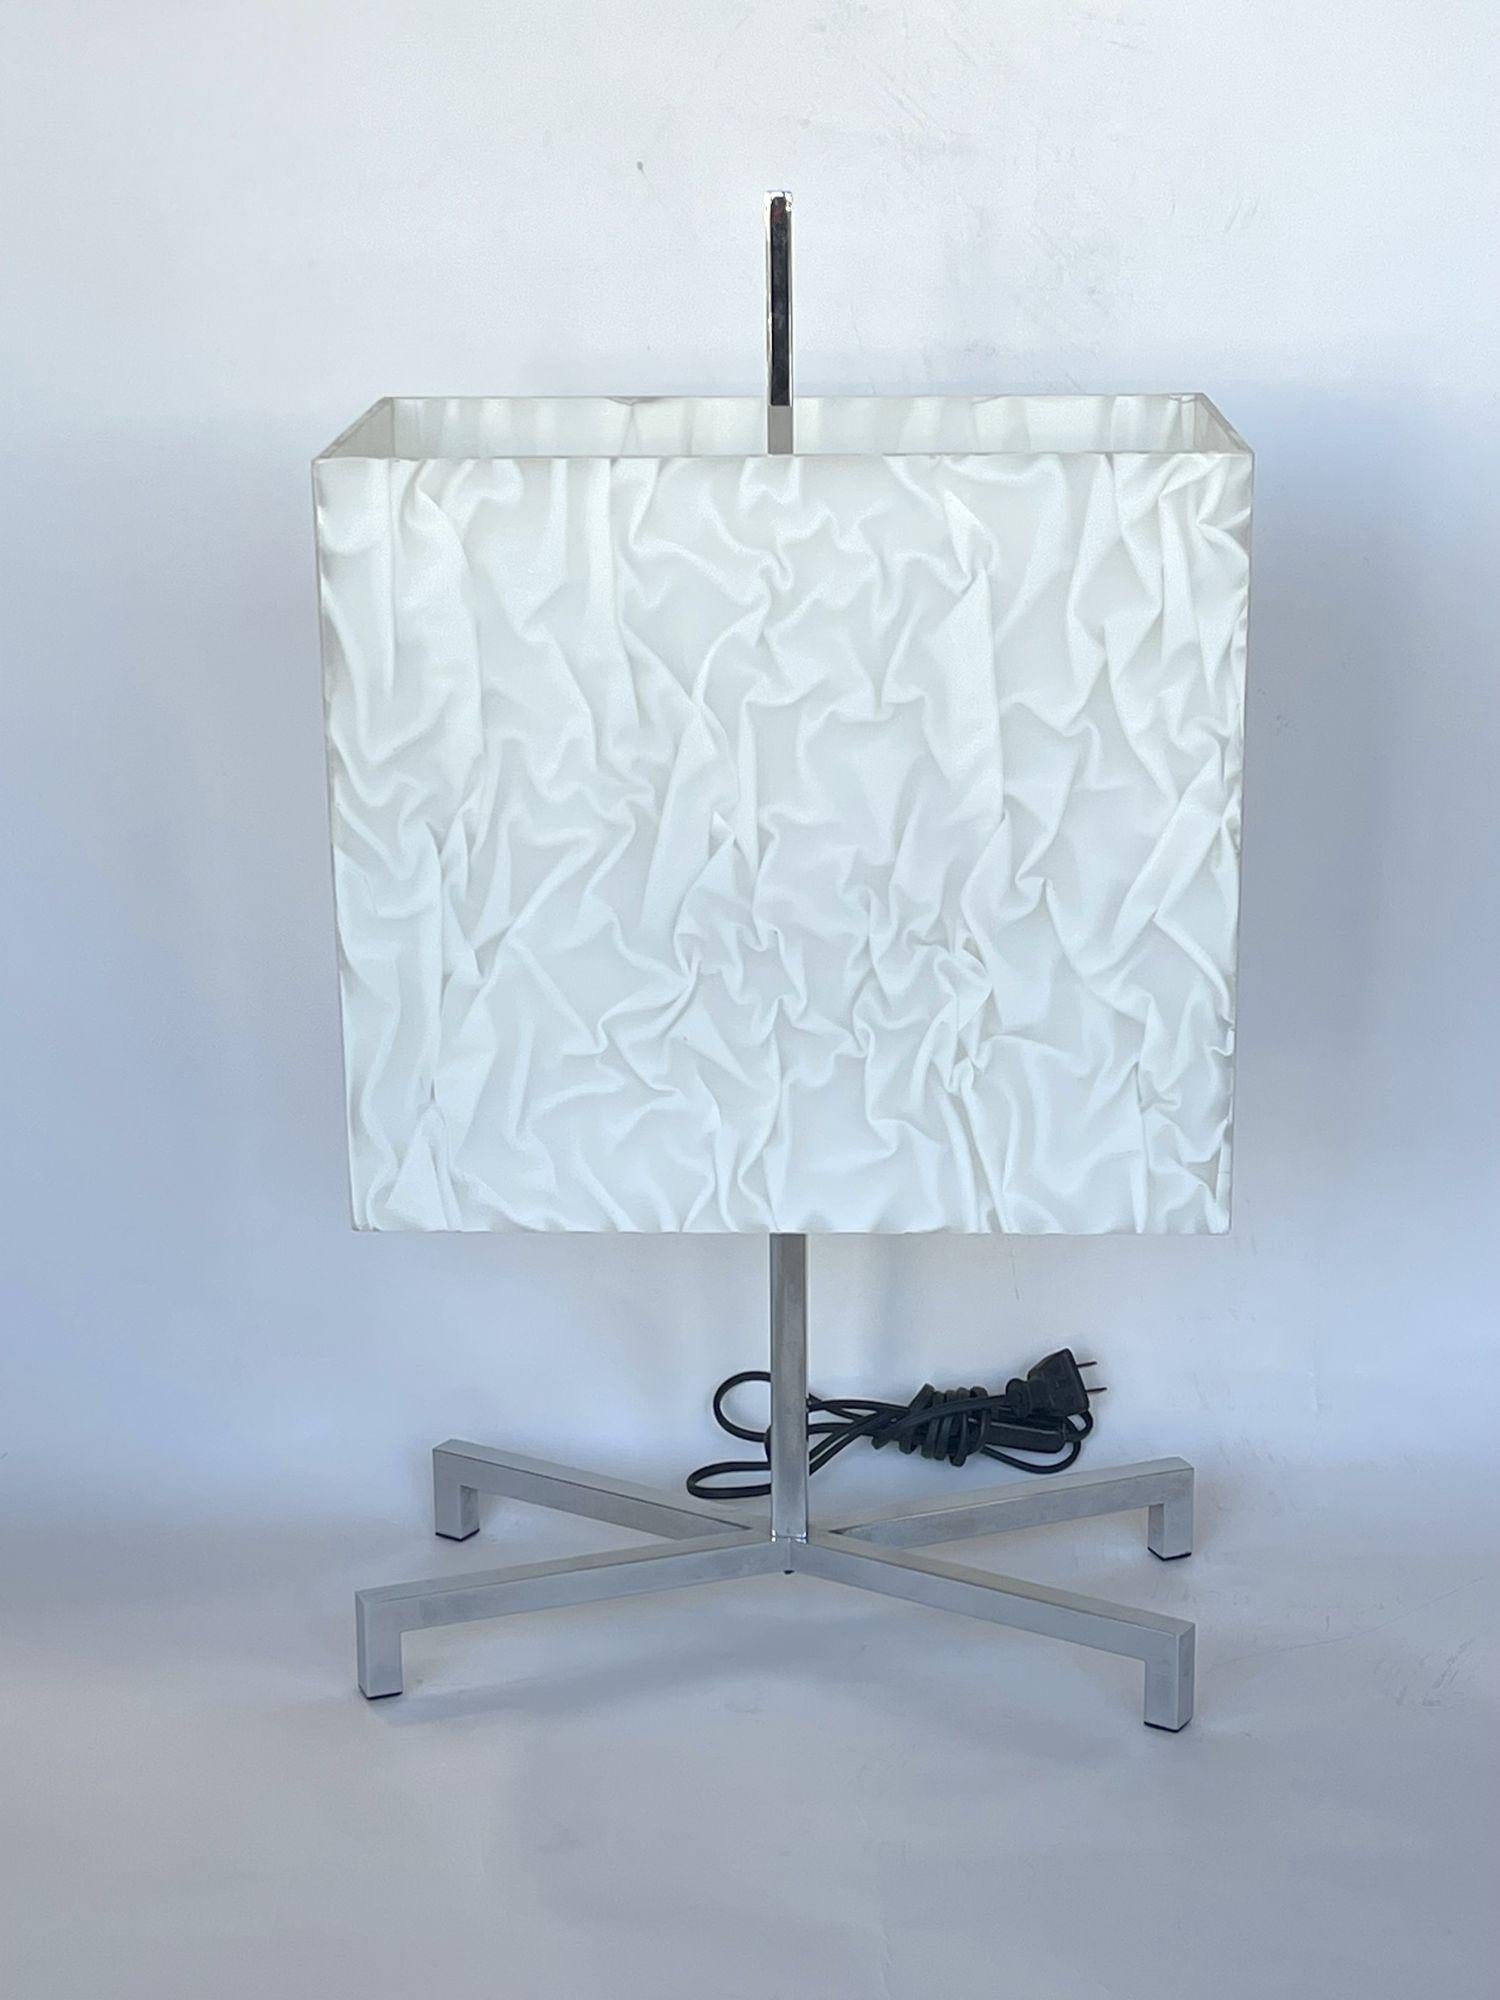 Gorgeous lucite and chrome table lamp by Fontana Arte. White lucite shade has patterned 